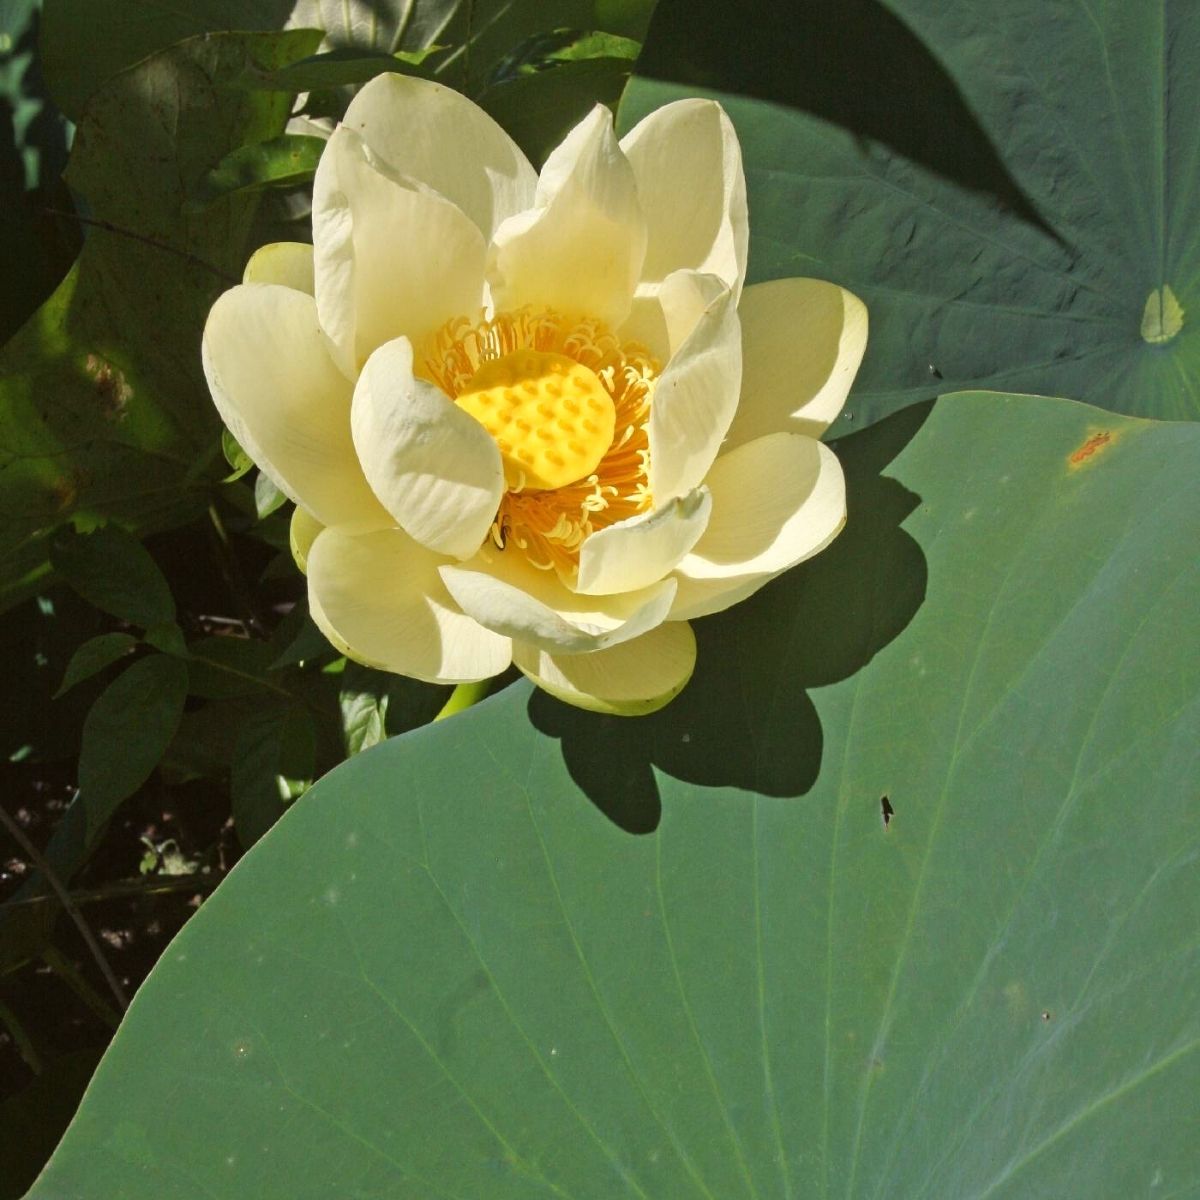 Lotus flowers have amazing benefits and medicinal properties on Thursd